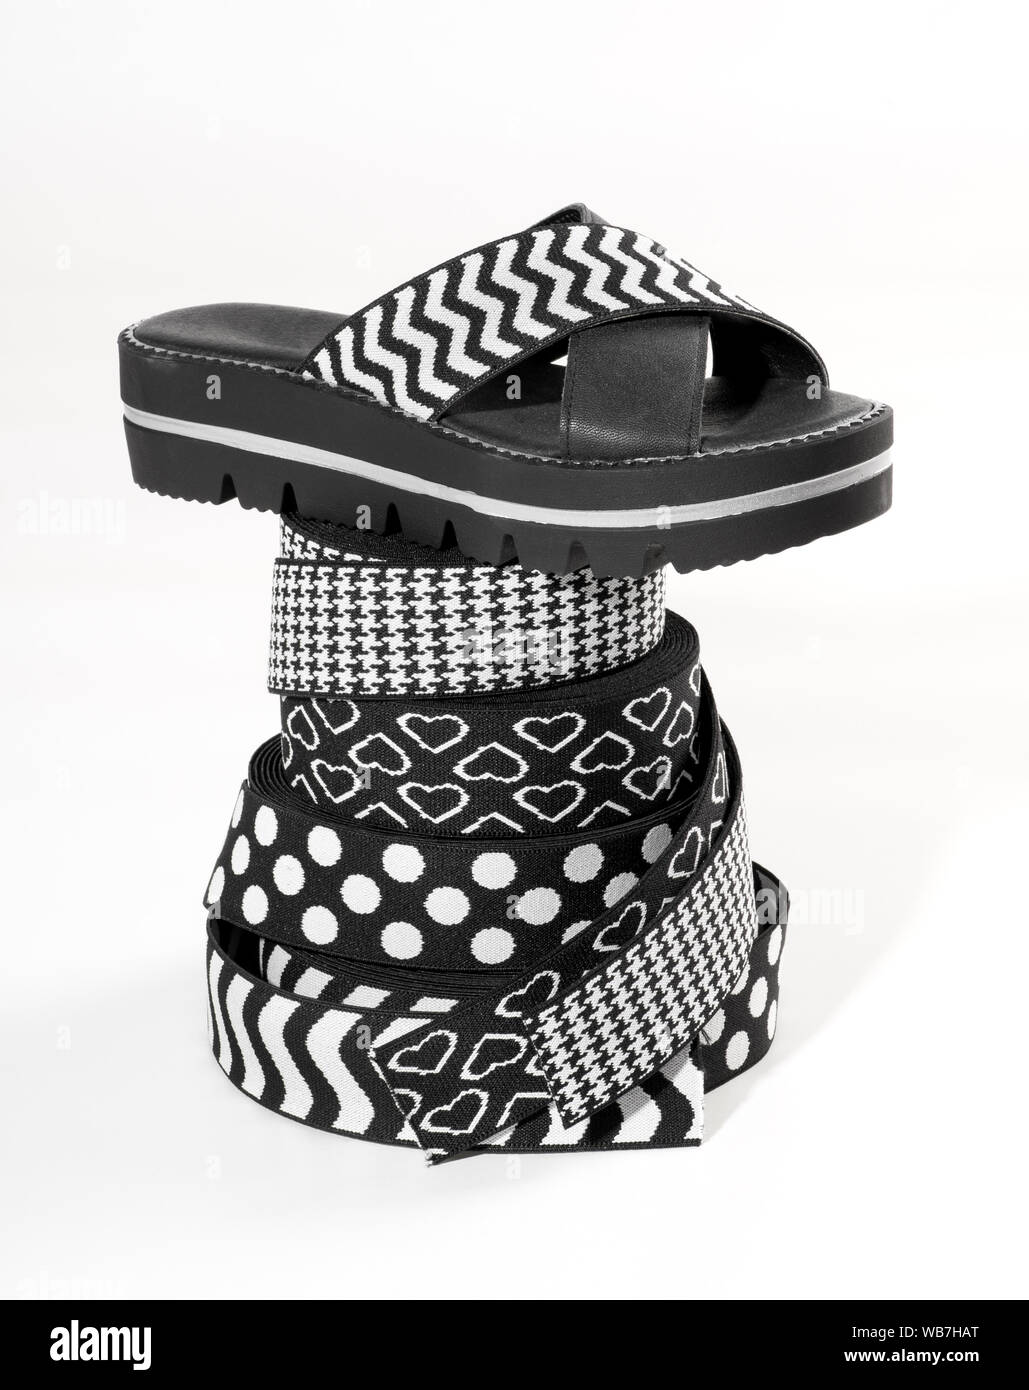 Summer sandal with crossed boldly patterned black and white elastic bands for uppers displayed balanced on a stack of decorative rolls of elastic with Stock Photo